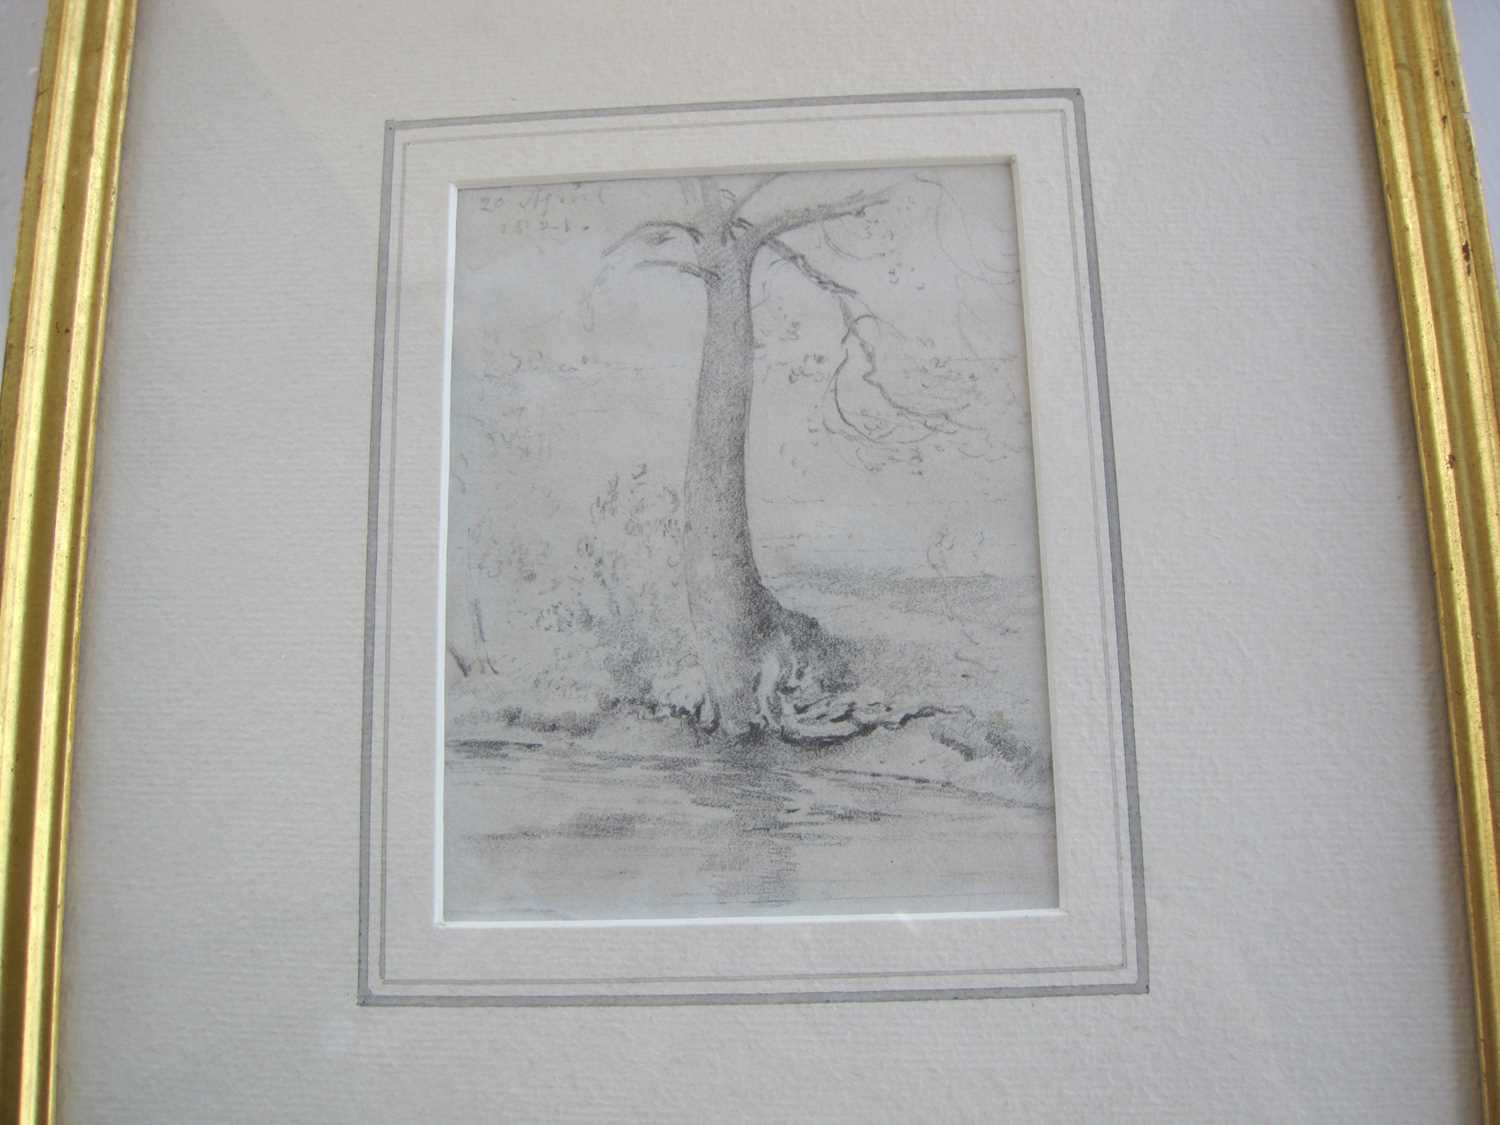 John Constable R.A. (1776 - 1837) A tree by the banks of a stream, pencil, 11.7cm x 8.9cm - Image 8 of 12